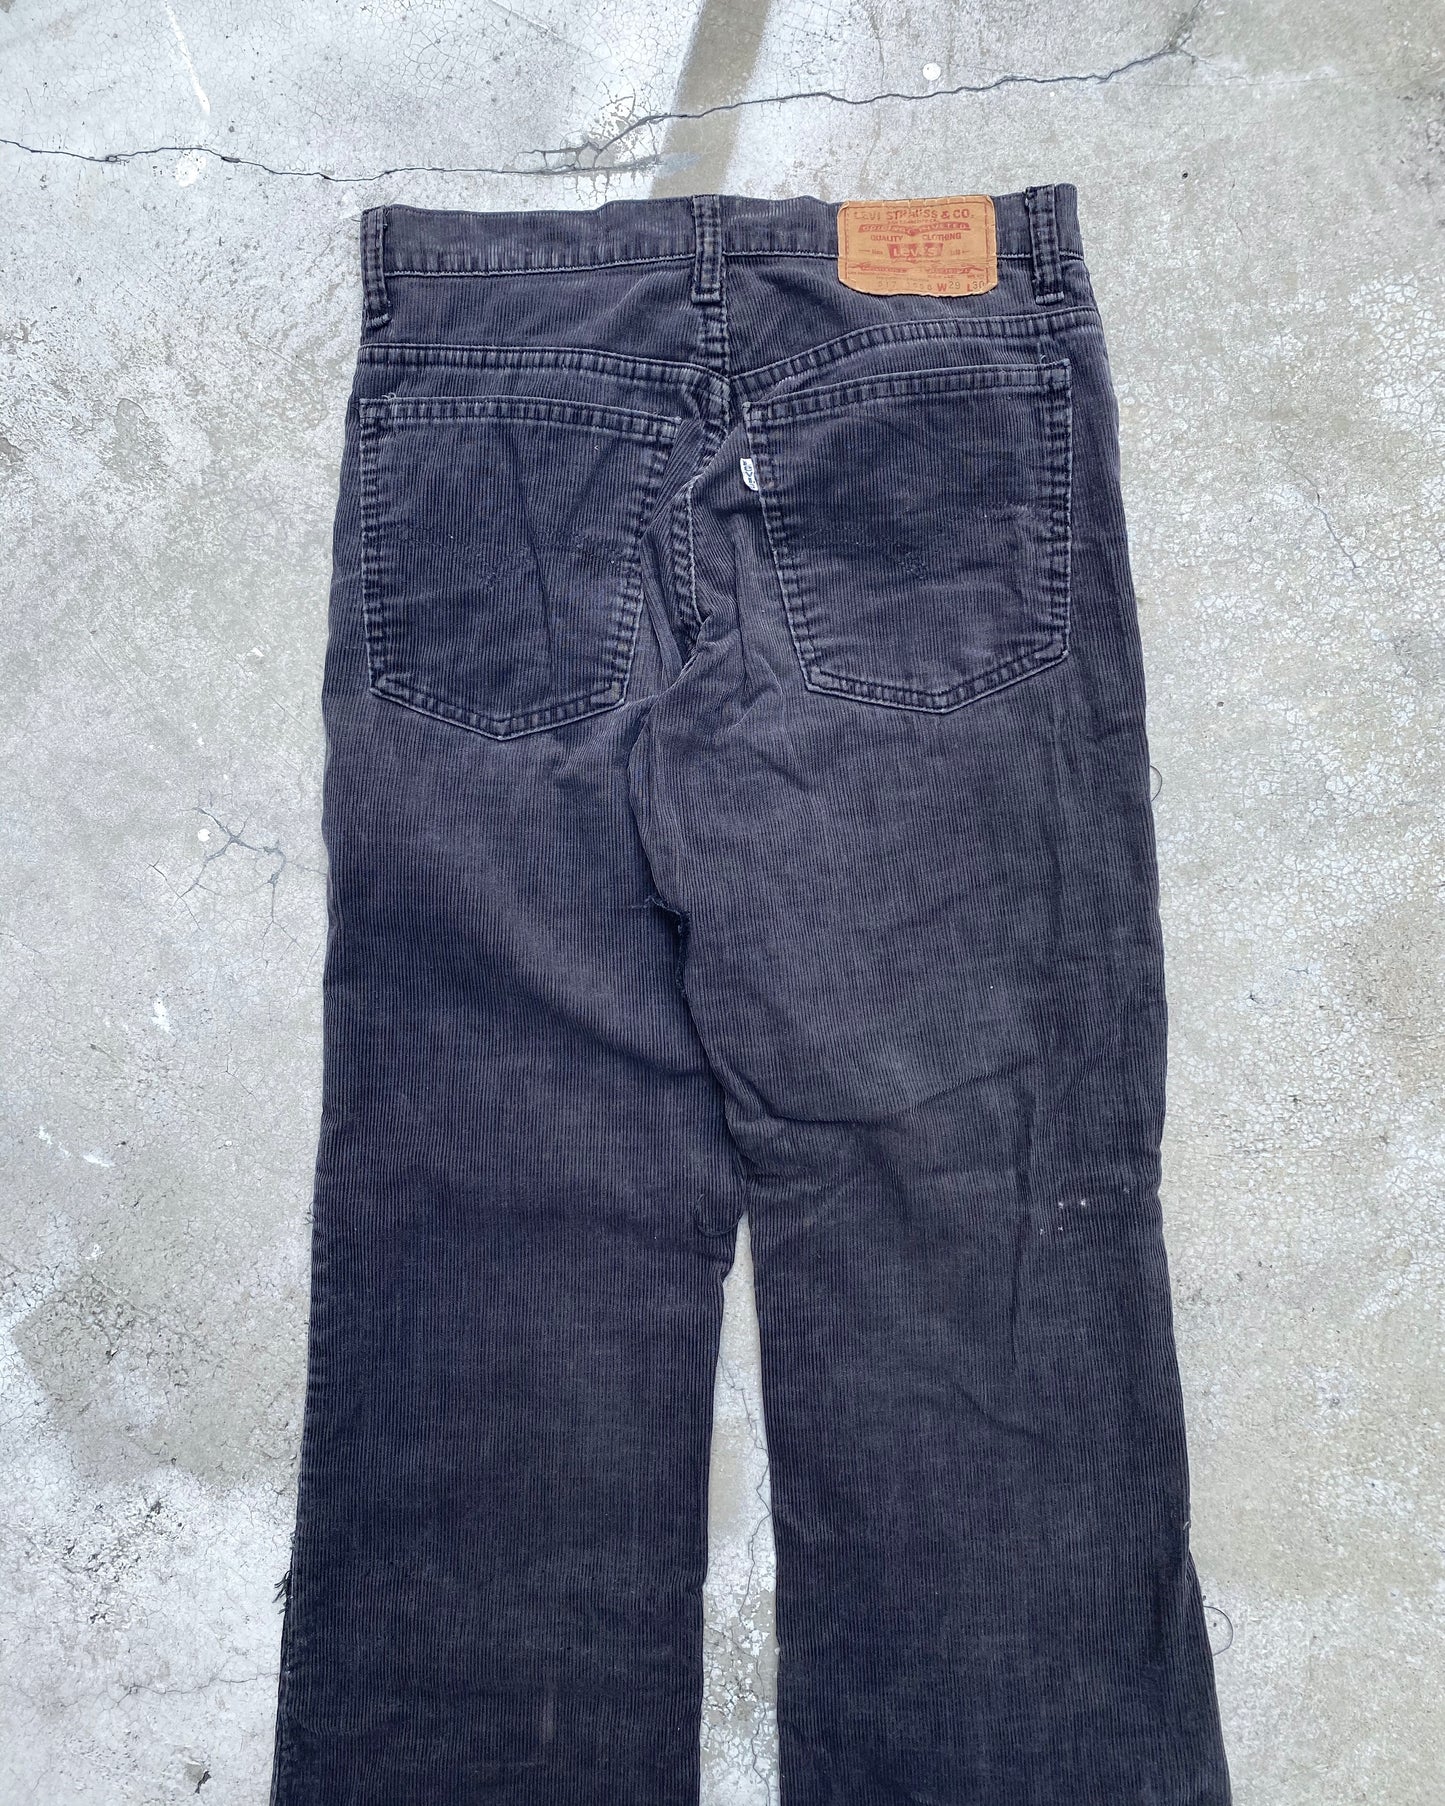 1970S CORDUROY PATCHED LEVI'S 517 FLARED JEANS (29X29)